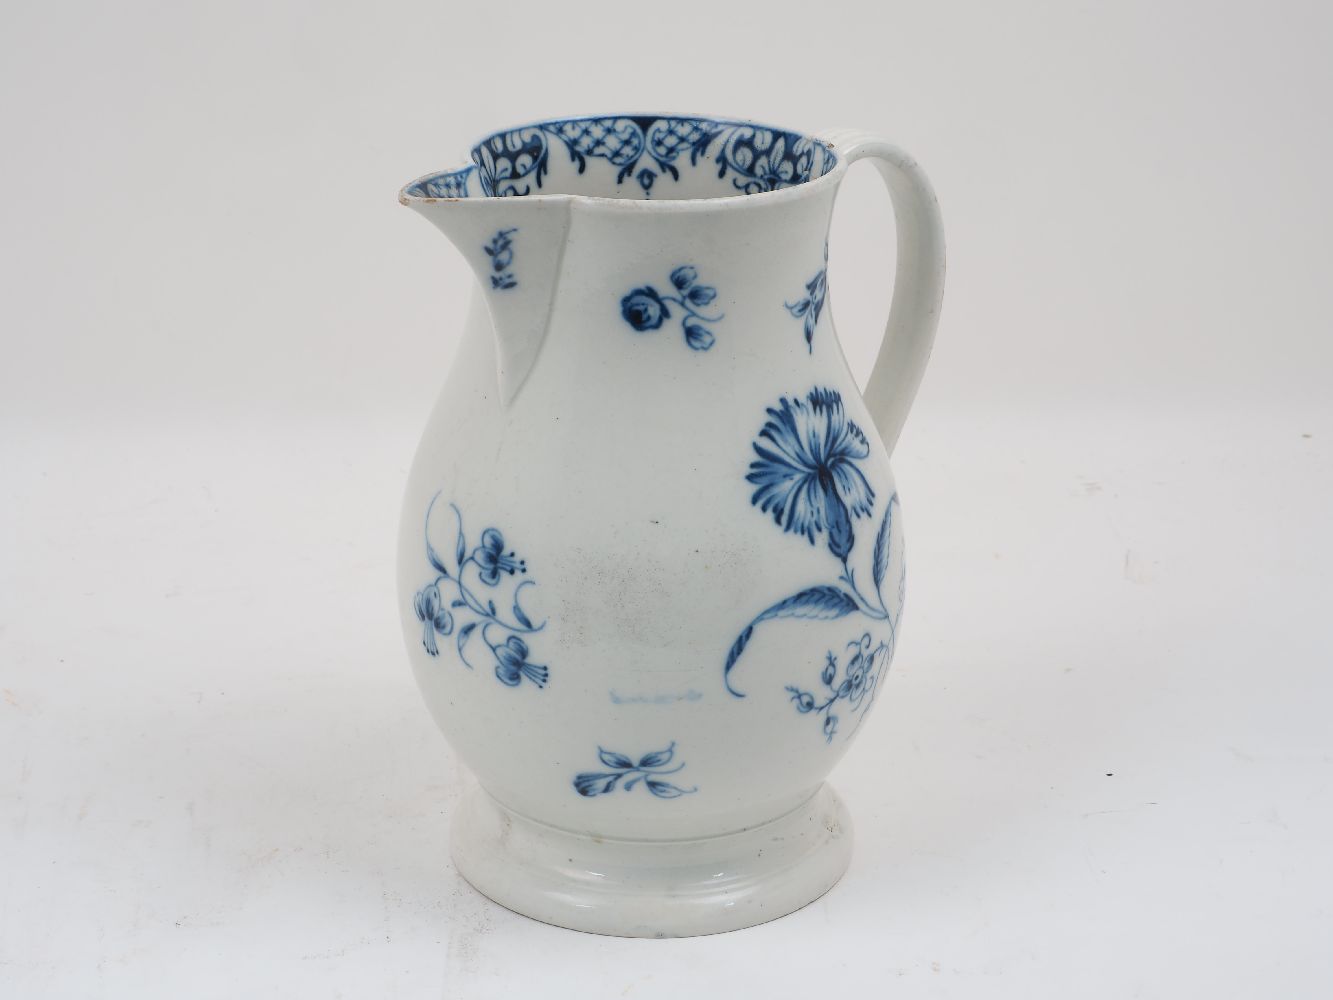 Lot 30: AMENDMENT. Please note that the lot should read ‘A blue and white porcelain jug of baluster